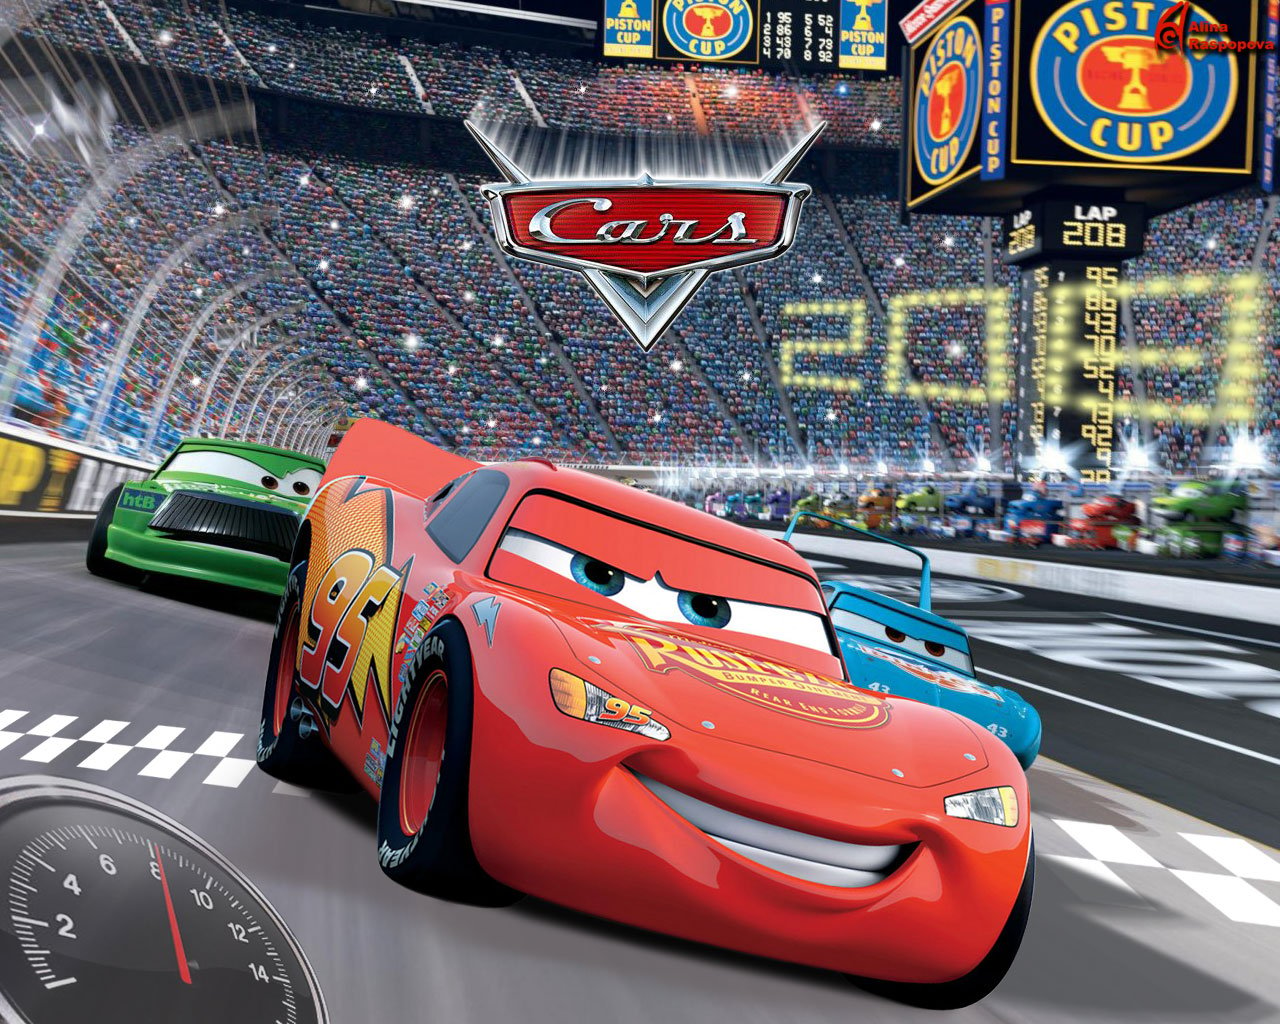 Nonstop review: 'Cars 2